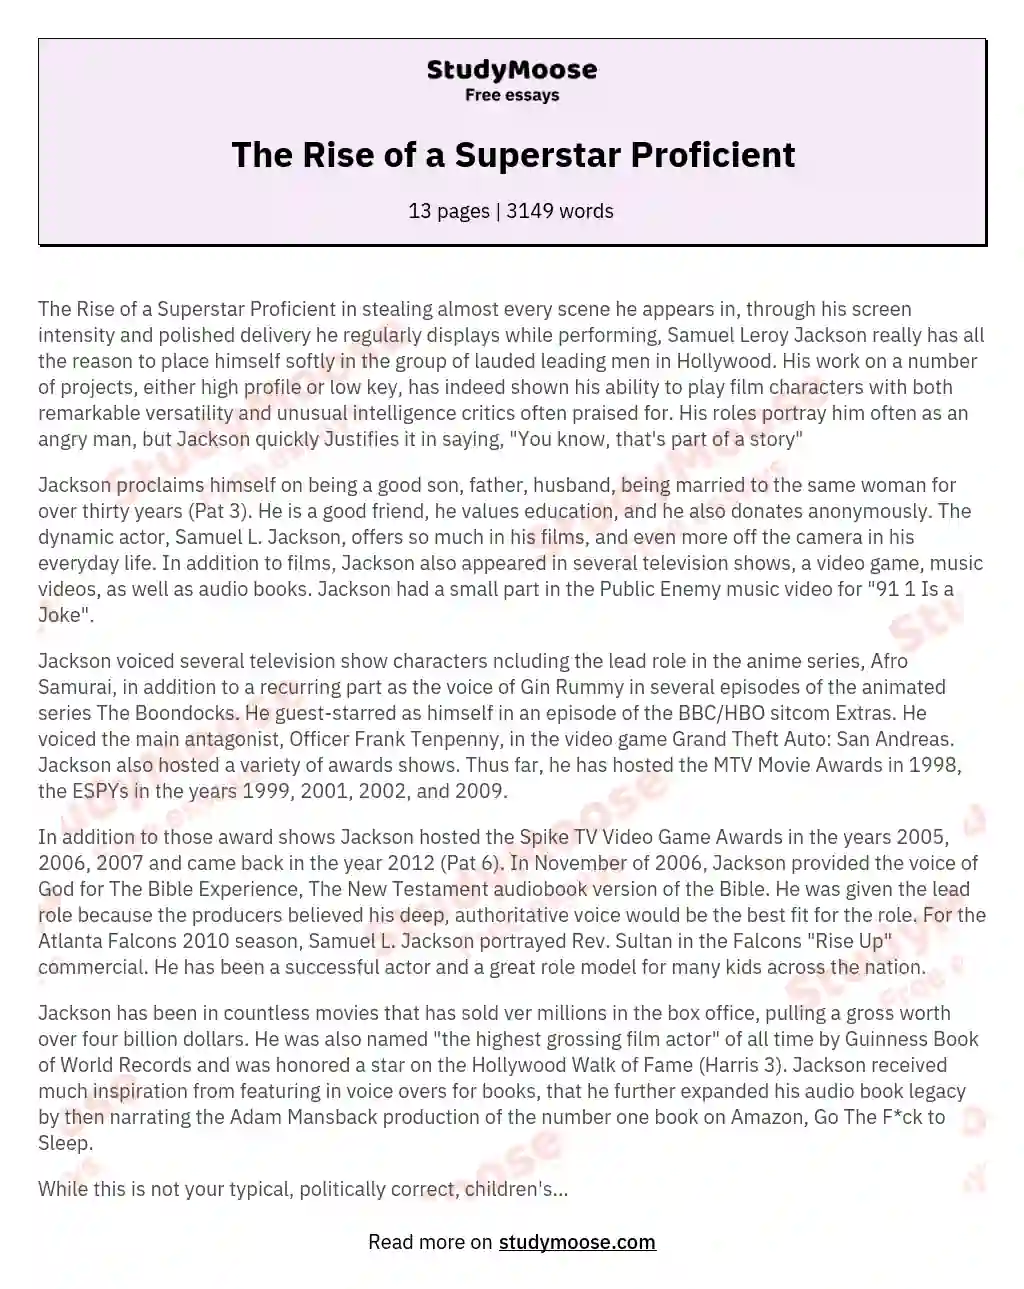 The Rise of a Superstar Proficient essay